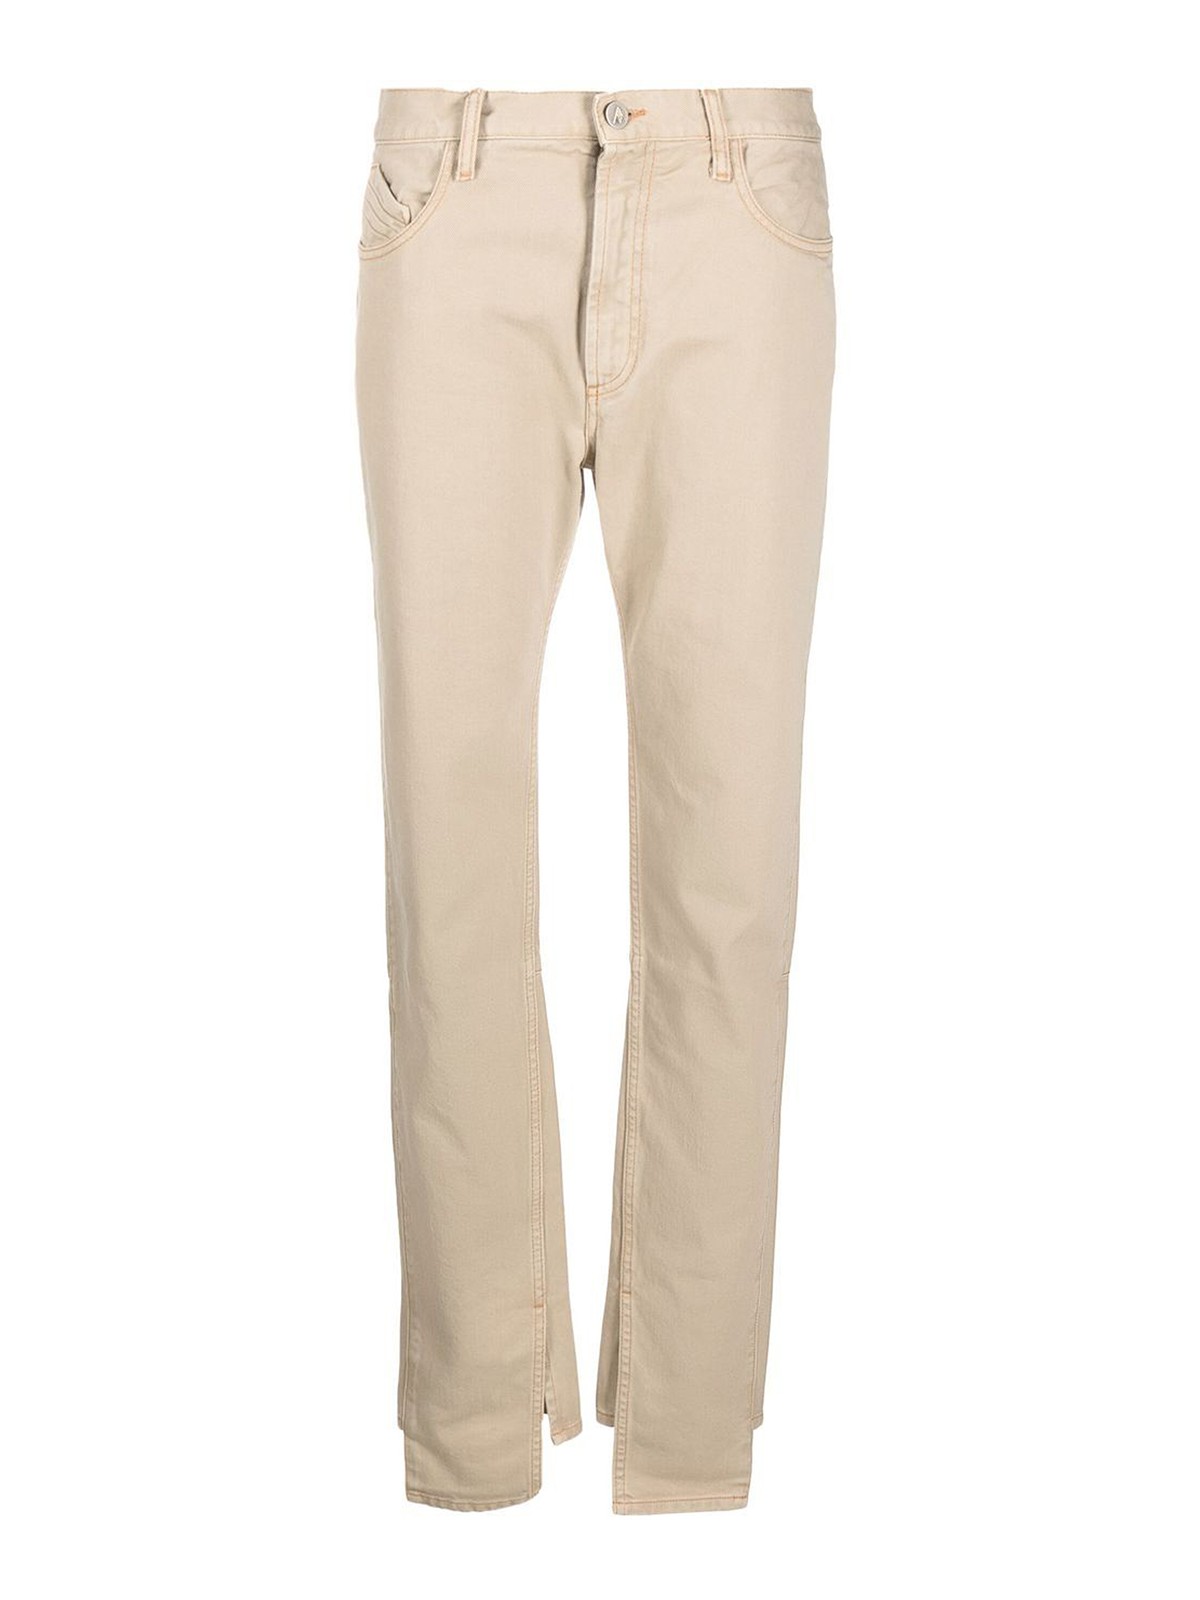 Attico The  Woman Pants Sand Size 30 Cotton In Beige